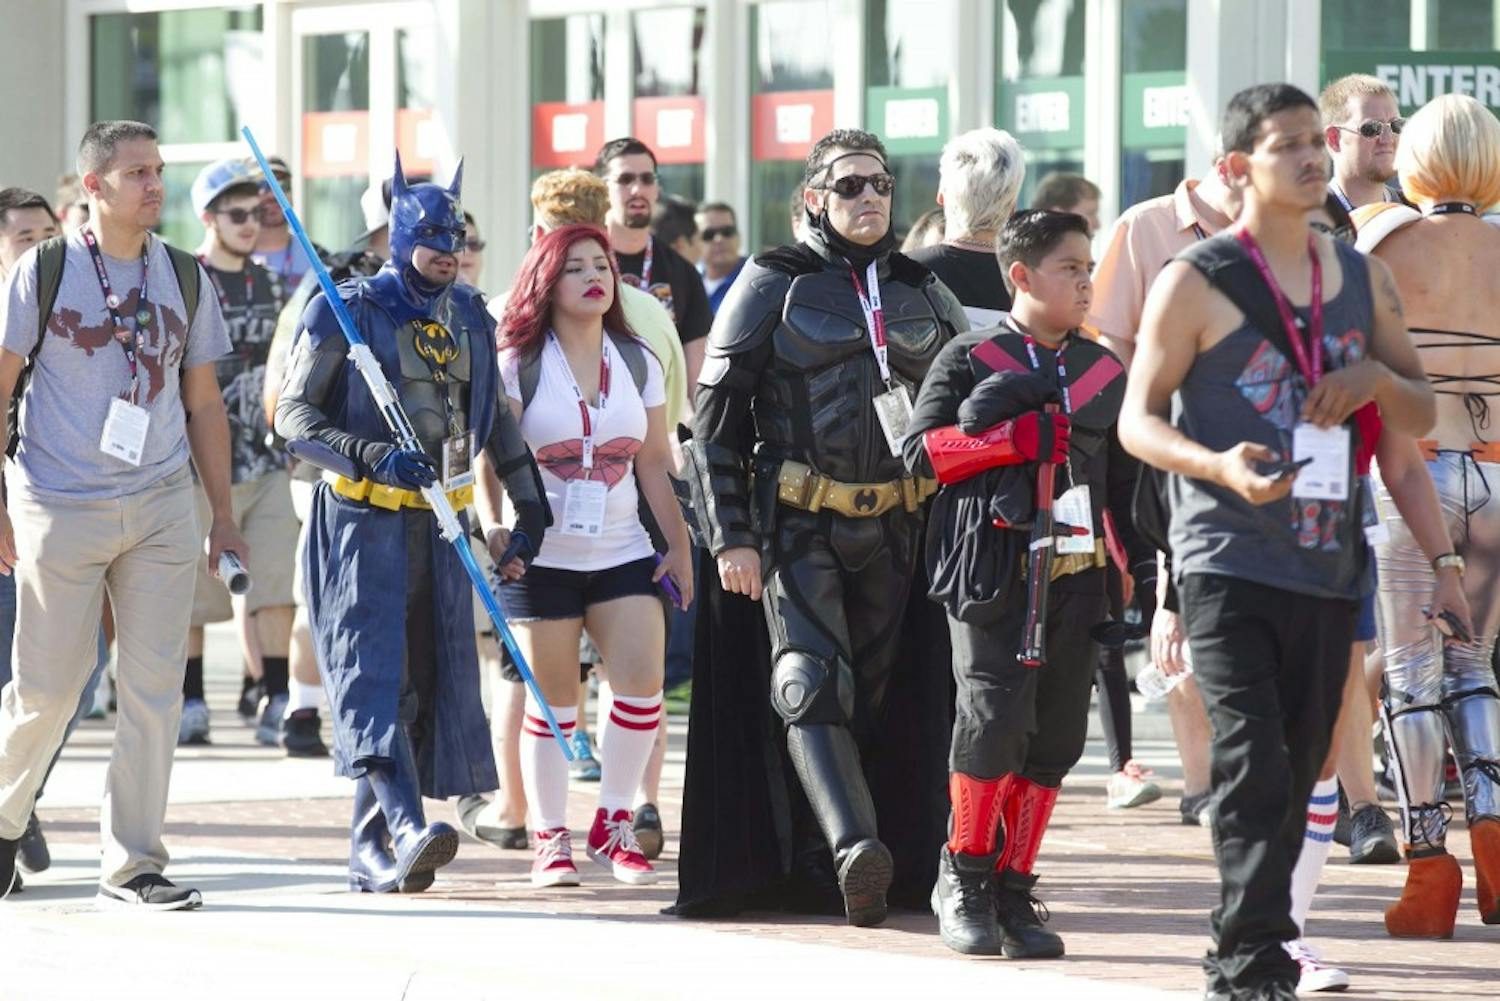 The first day of Comic-Con at the Convention Center started smoothly with large crowds and warm weather on July 21, 2016 in San Diego, Calif. (John Gibbins/San Diego Union-Tribune/TNS) 